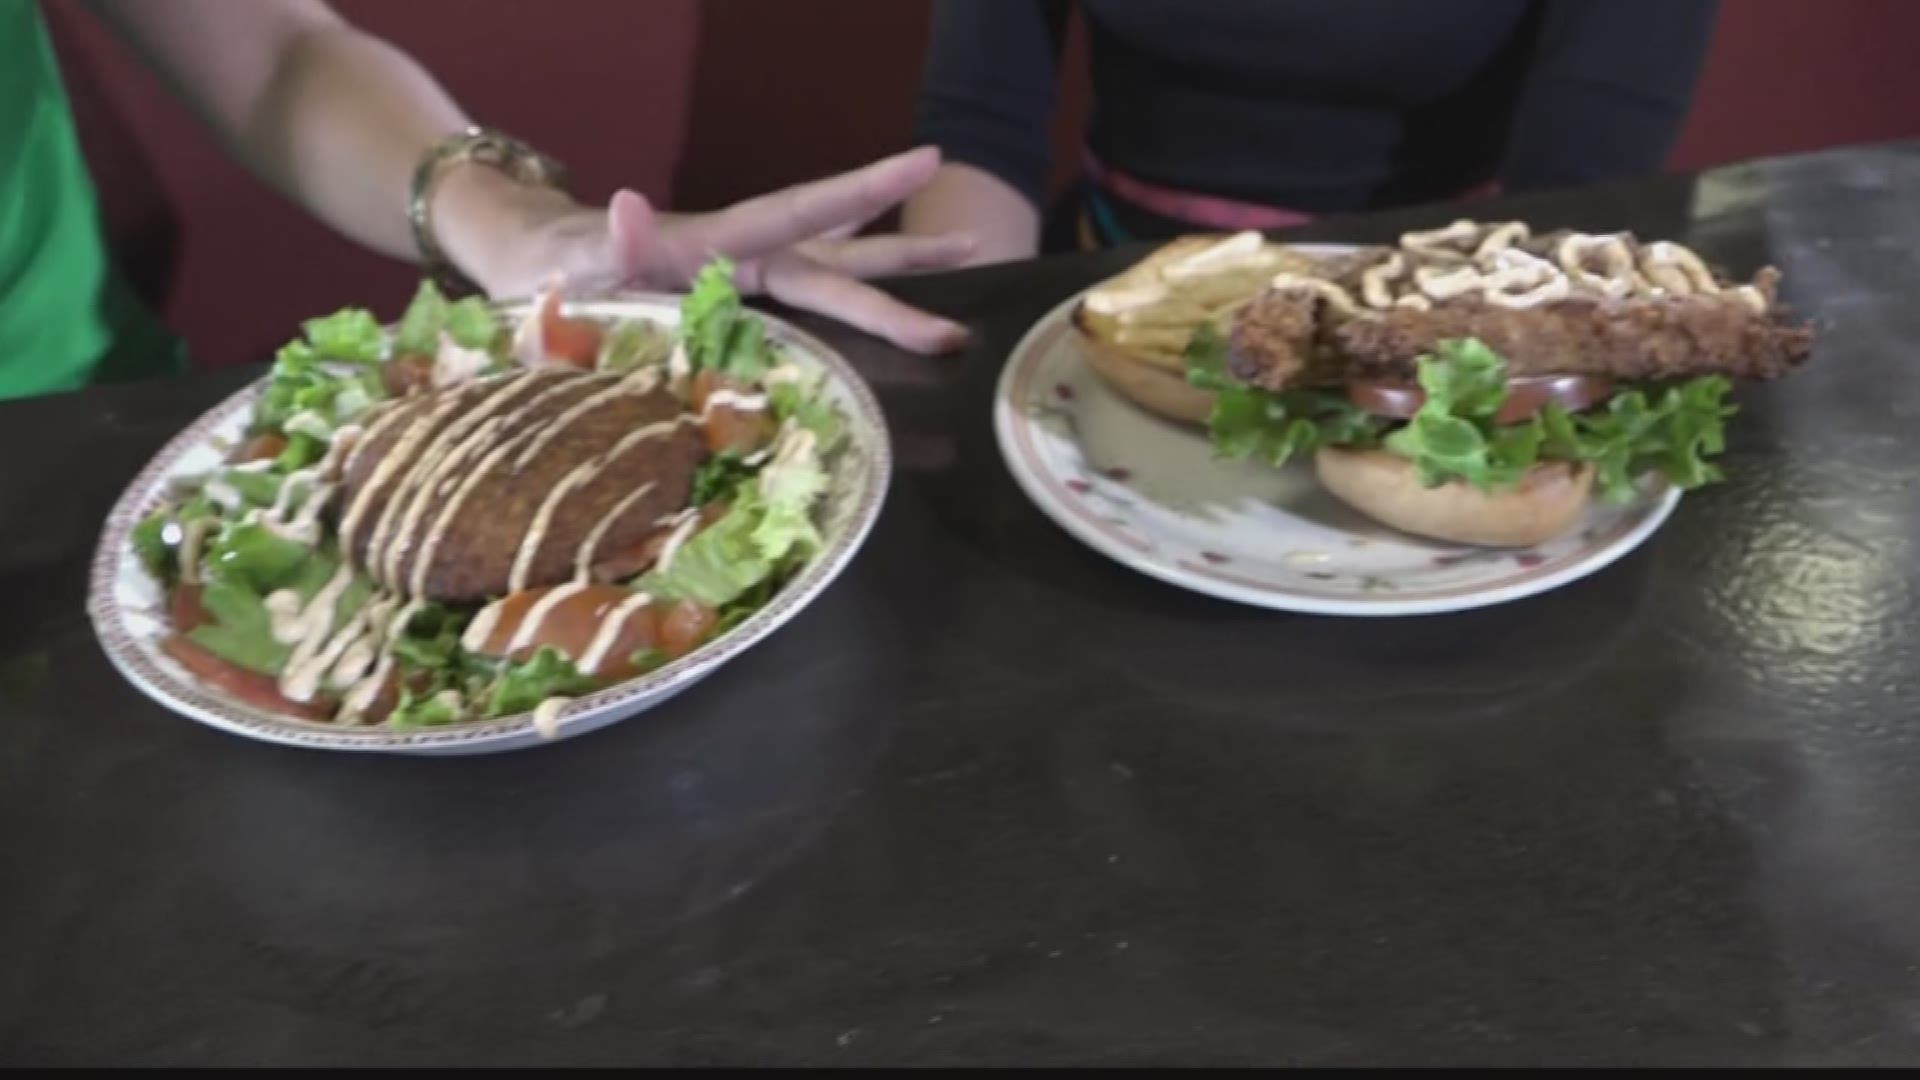 Alex Livingston takes us inside of Murray HillBilly for a taste of vegan dishes you can enjoy throughout meatless March.